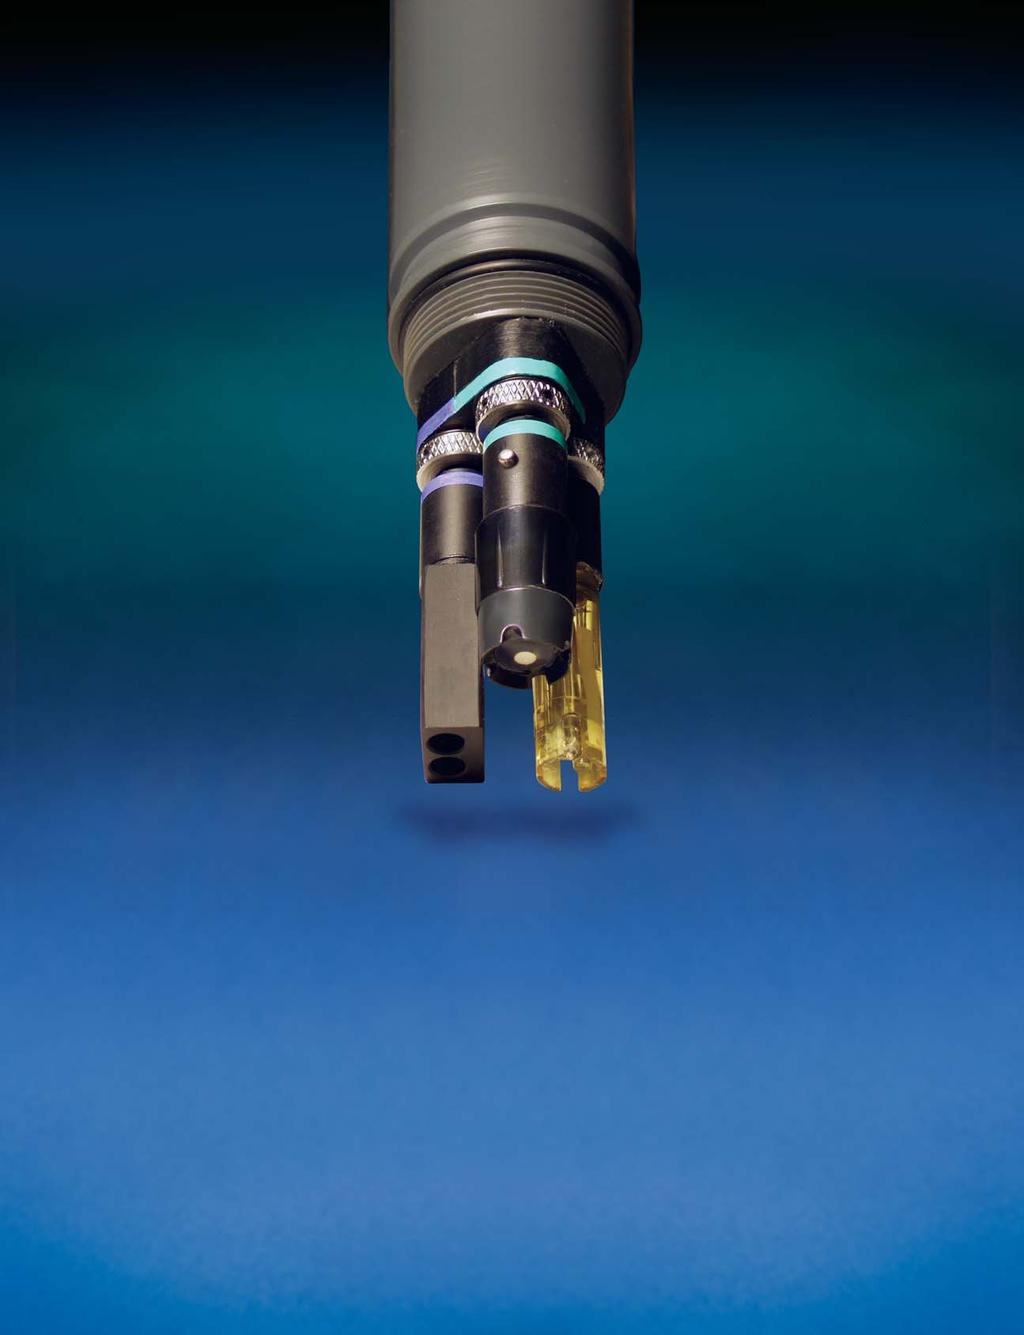 ... with Intelligent Probe SENSOR REPLACEMENT IS QUICK AND EASY with screw type connectors and color coded sensors. THE GALVANIC D.O. SENSOR has a built-in thermistor to provide fast temperature corrected readings.